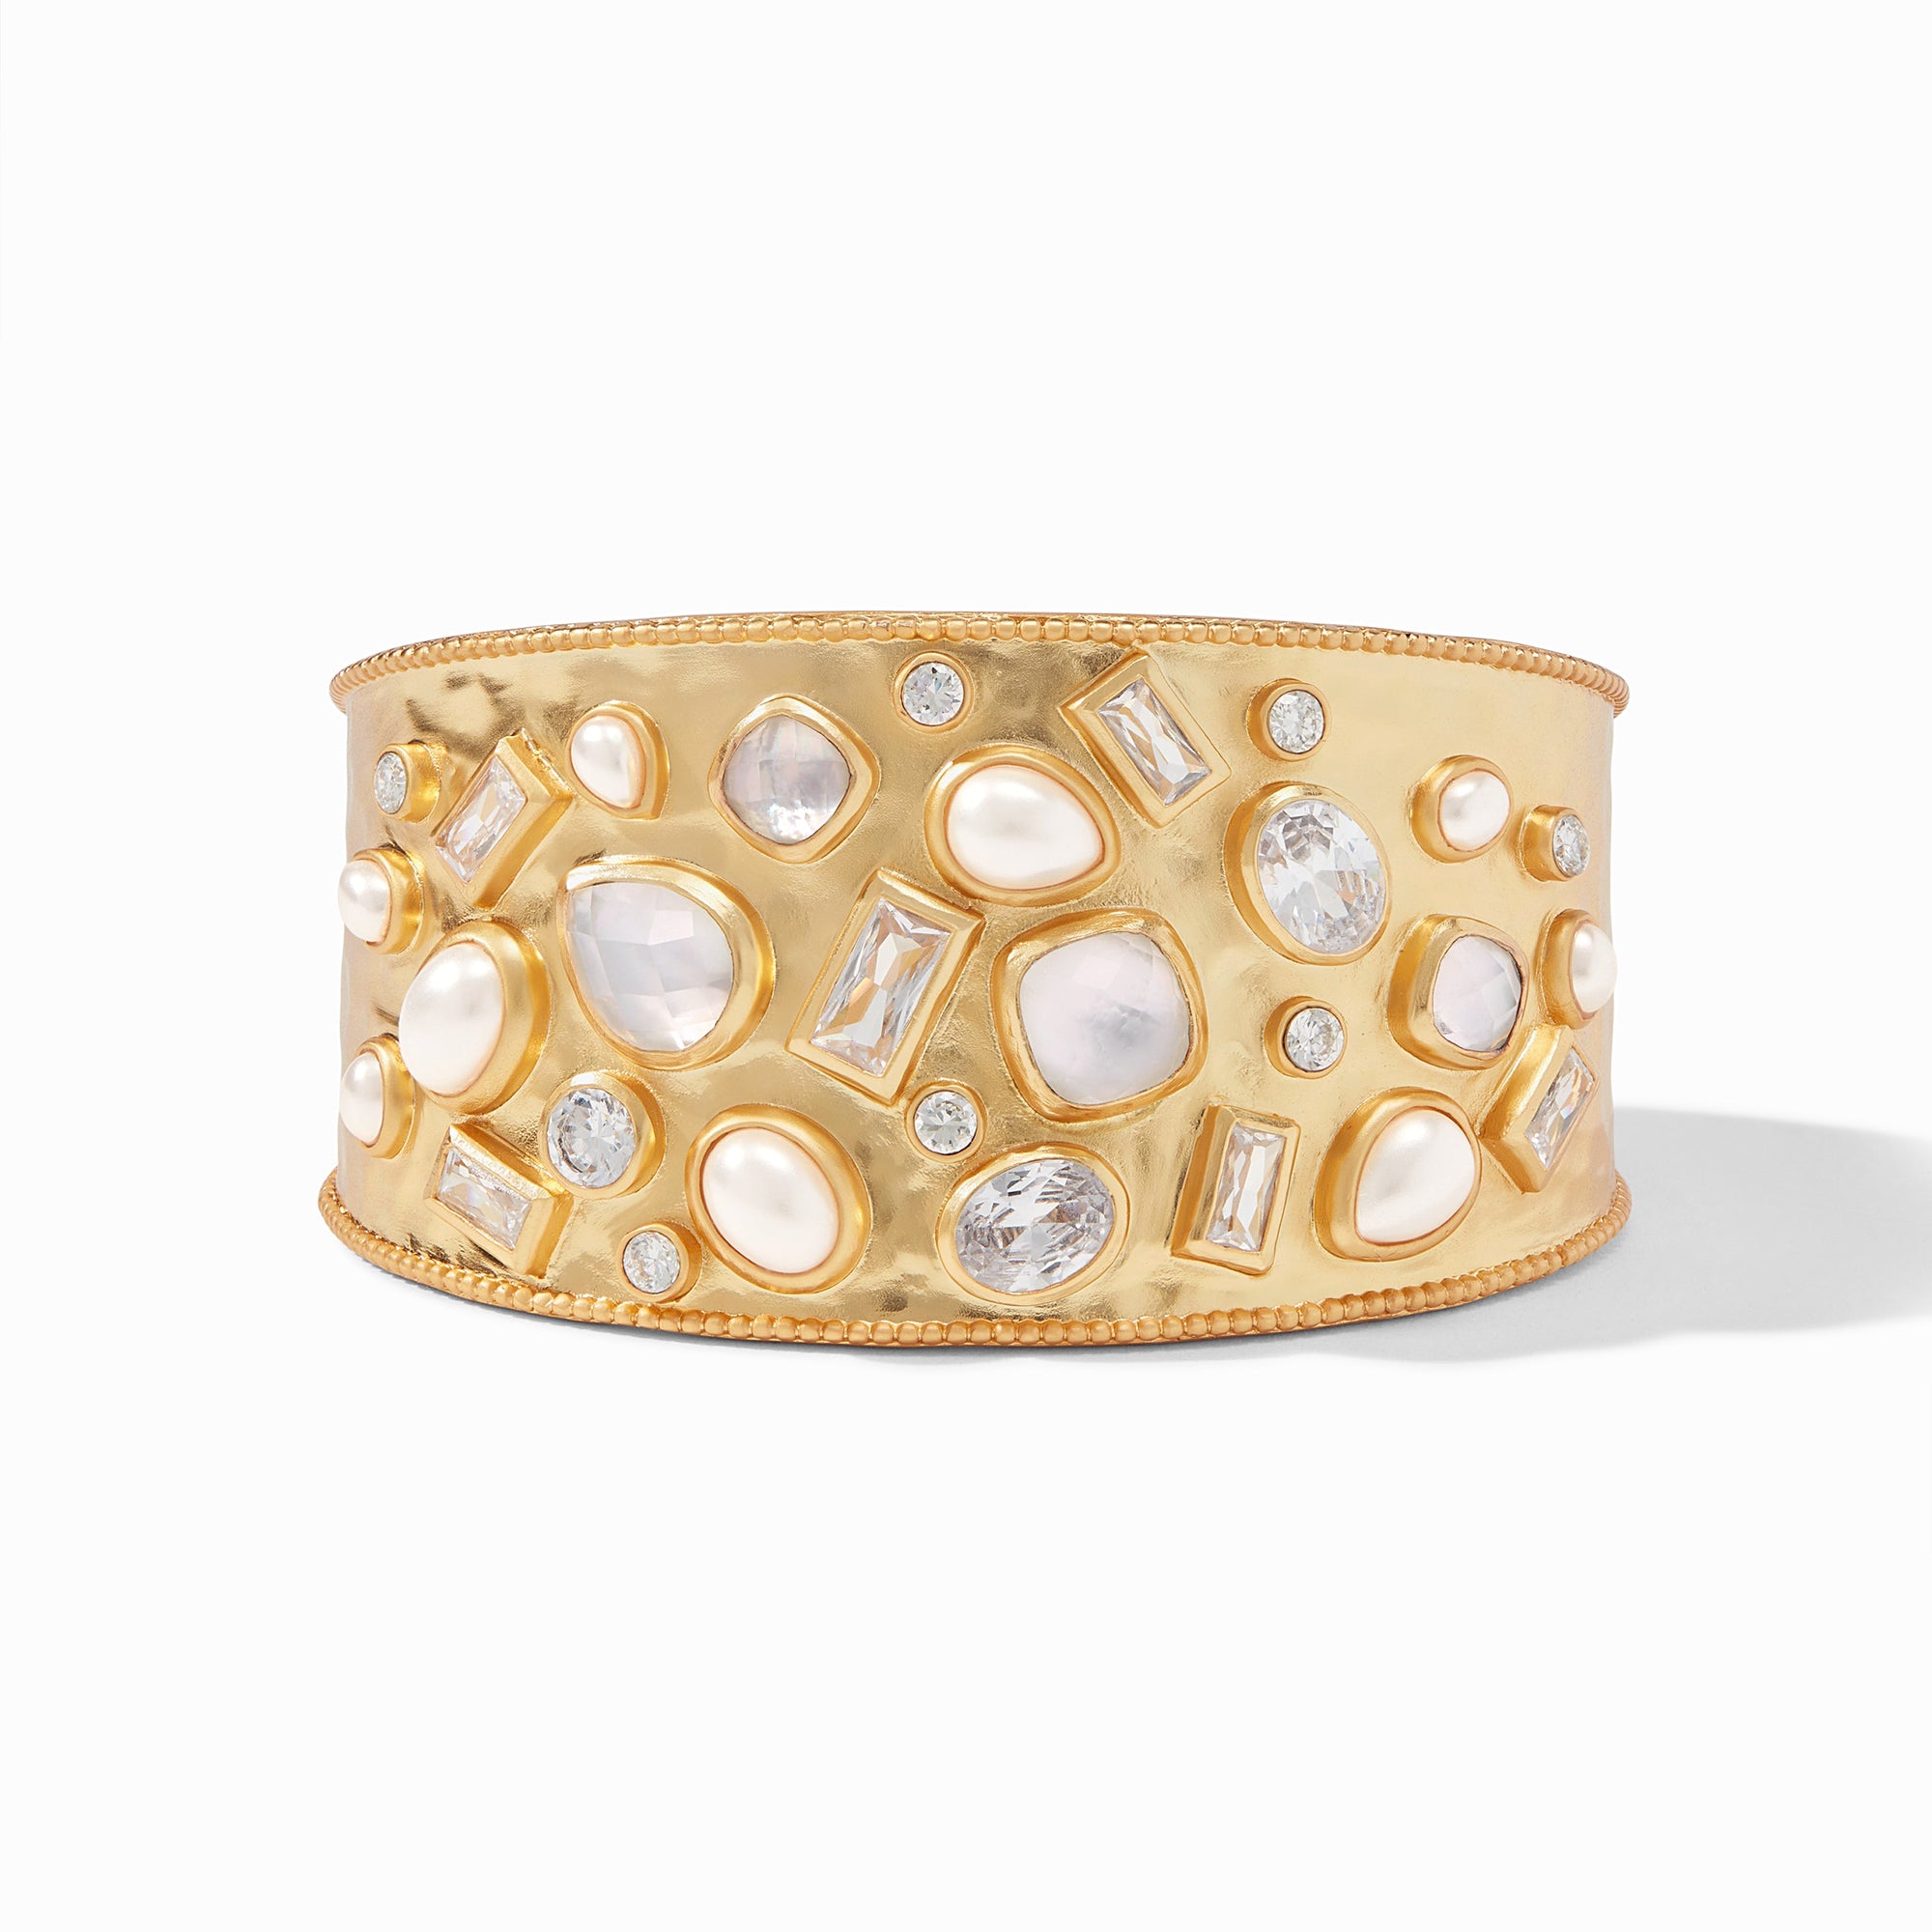 Julie Vos - Antonia Mosaic Cuff, Iridescent Clear Crystal